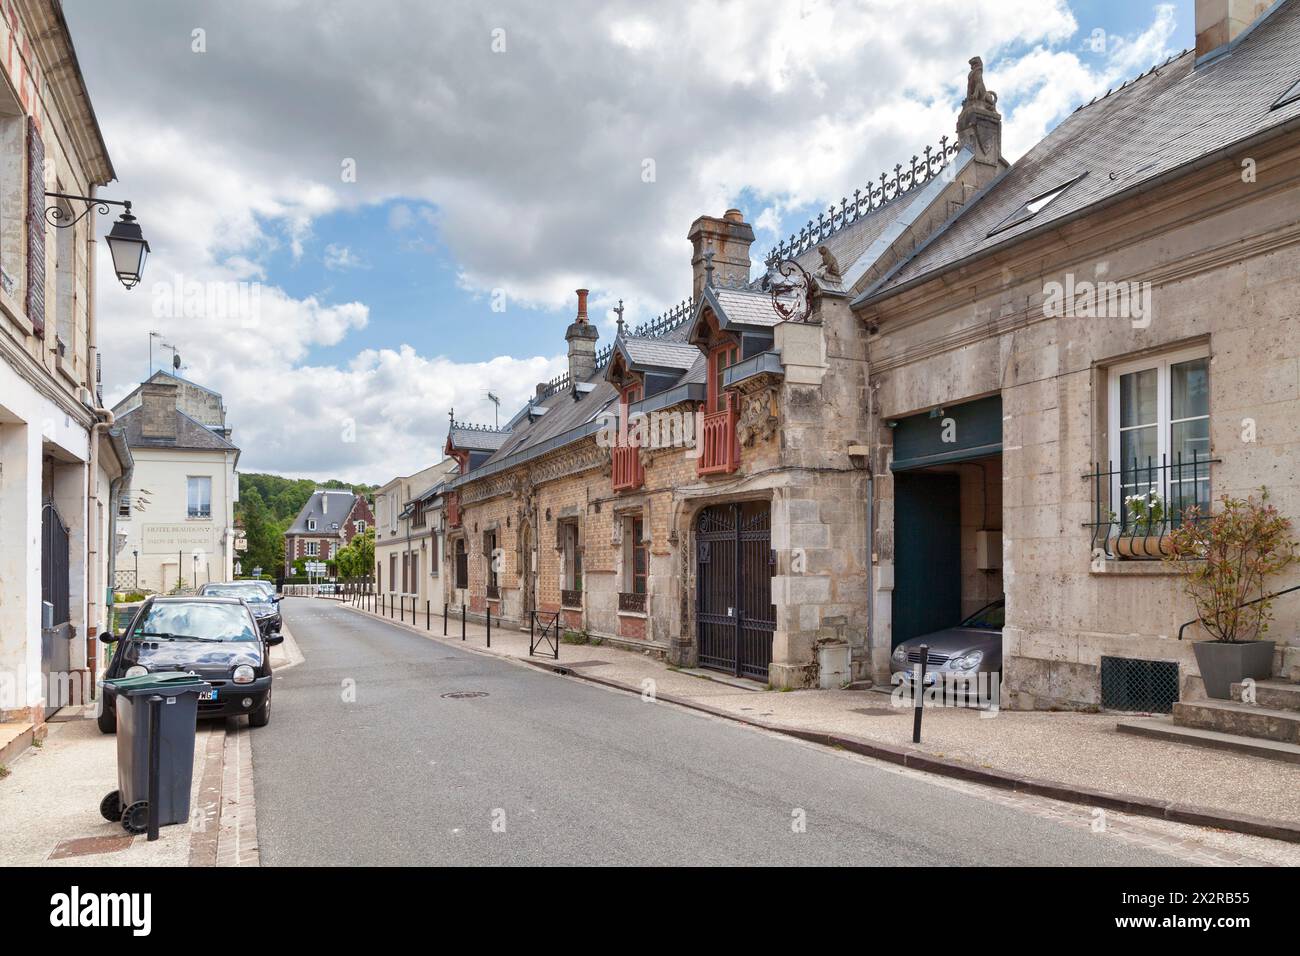 Pierrefonds, France - May 25 2020: The Villa Palestina is a neo-Gothic style house located Rue du Beaudon in the city center. Stock Photo